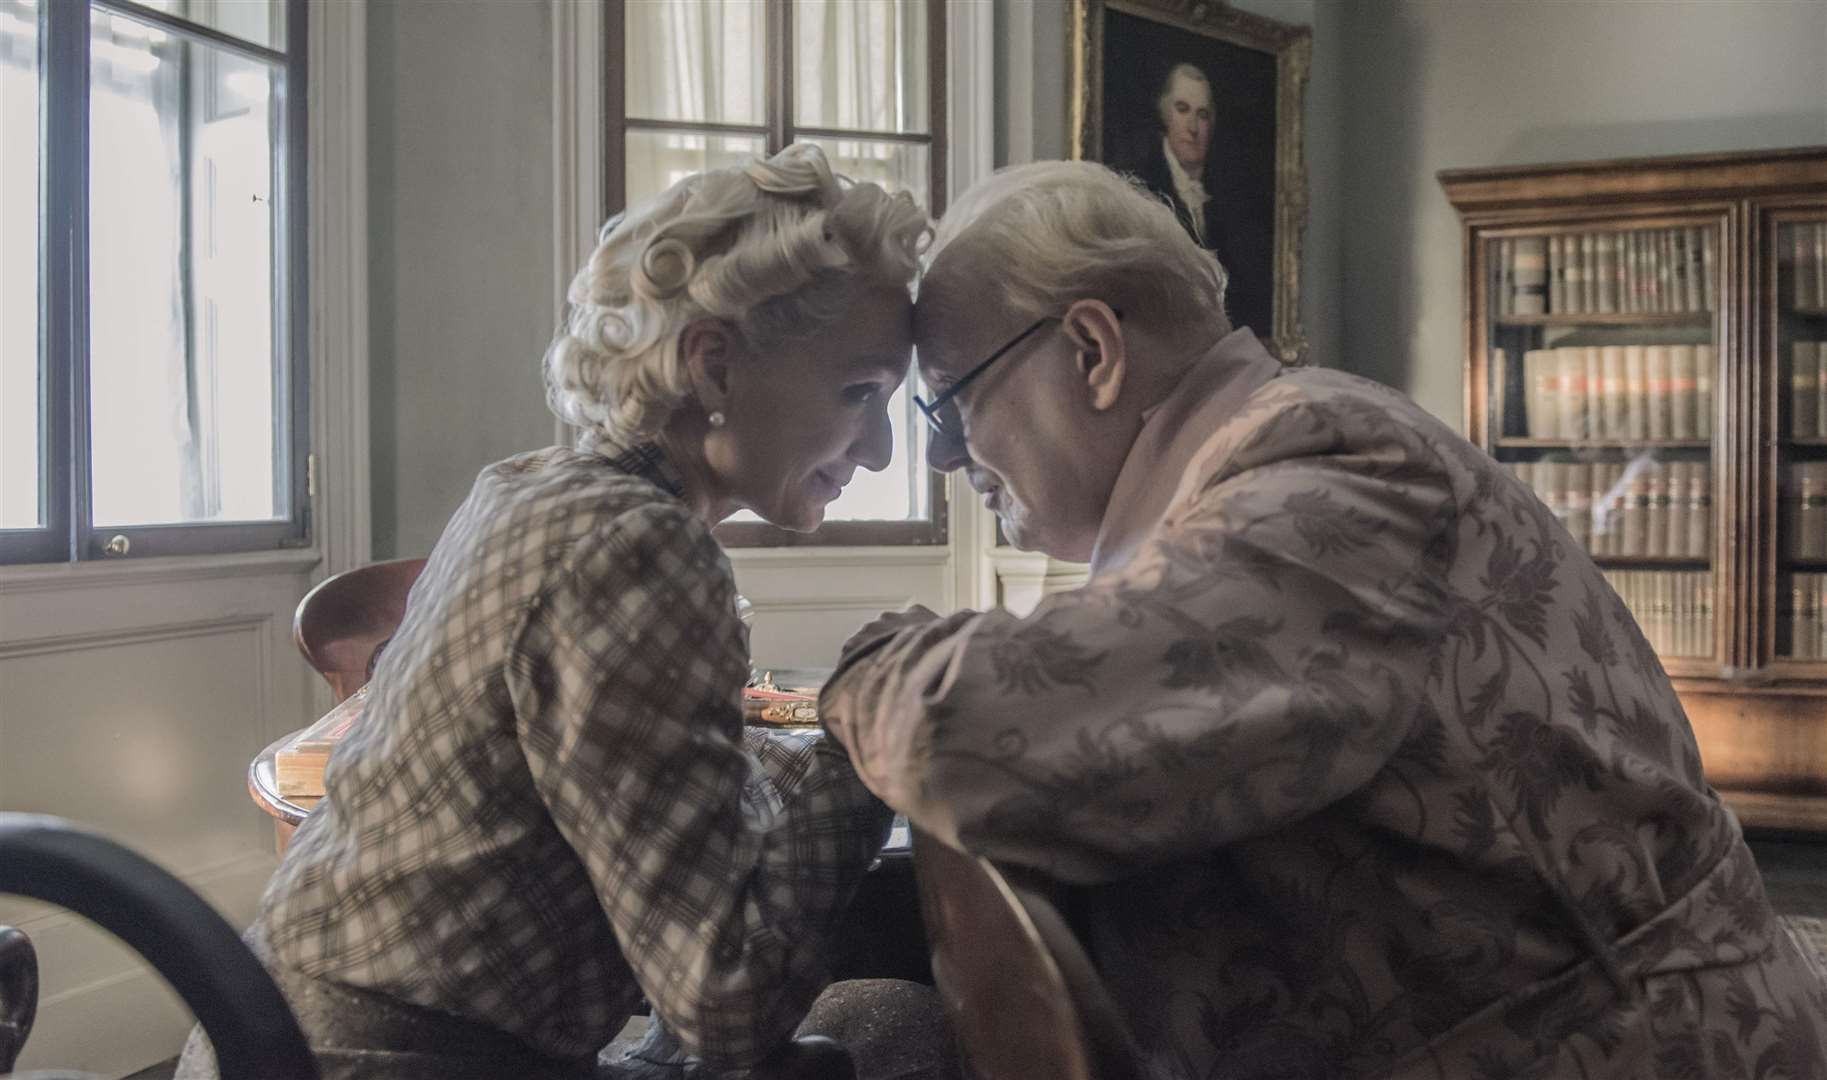 Kristin Scott Thomas as Clementine Churchill and Gary Oldman as Winston Churchill in Darkest Hour. Picture: PA Photo/Universal Pictures International/Focus Features/Jack English